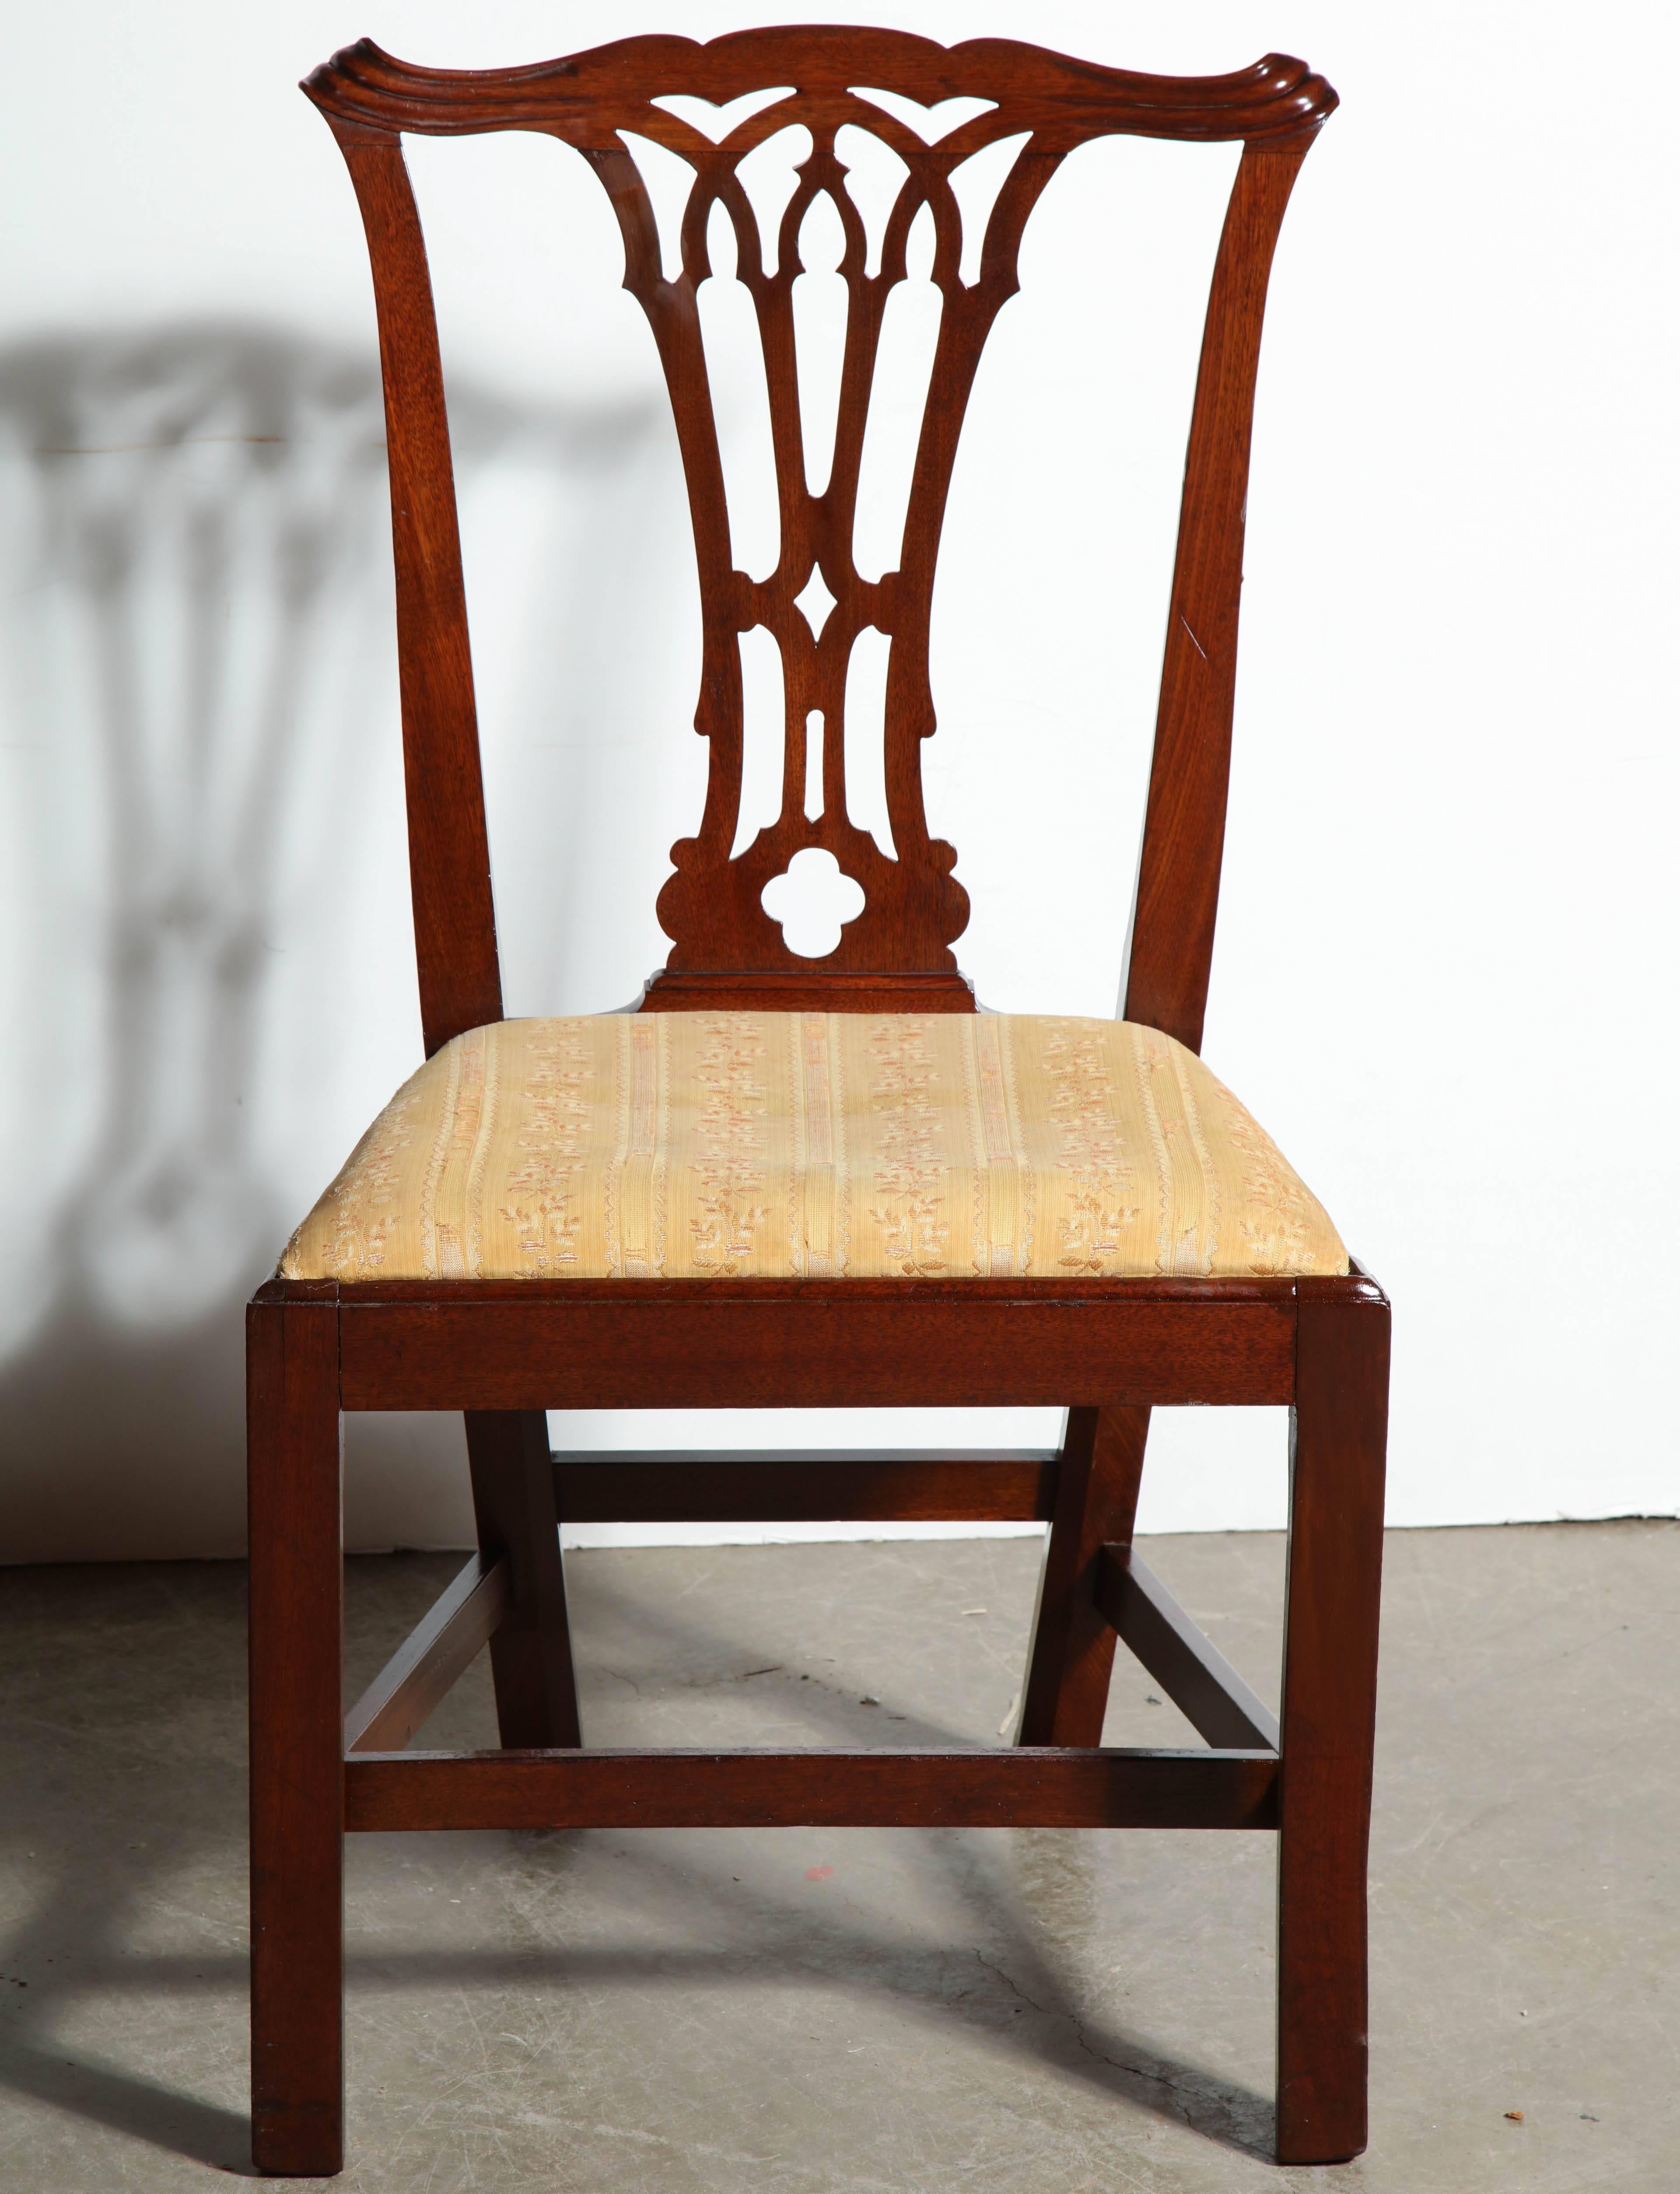 A set of English George III mahogany dining chairs with slip seats, scrolled ears, interlaced splats and a stretcher base.